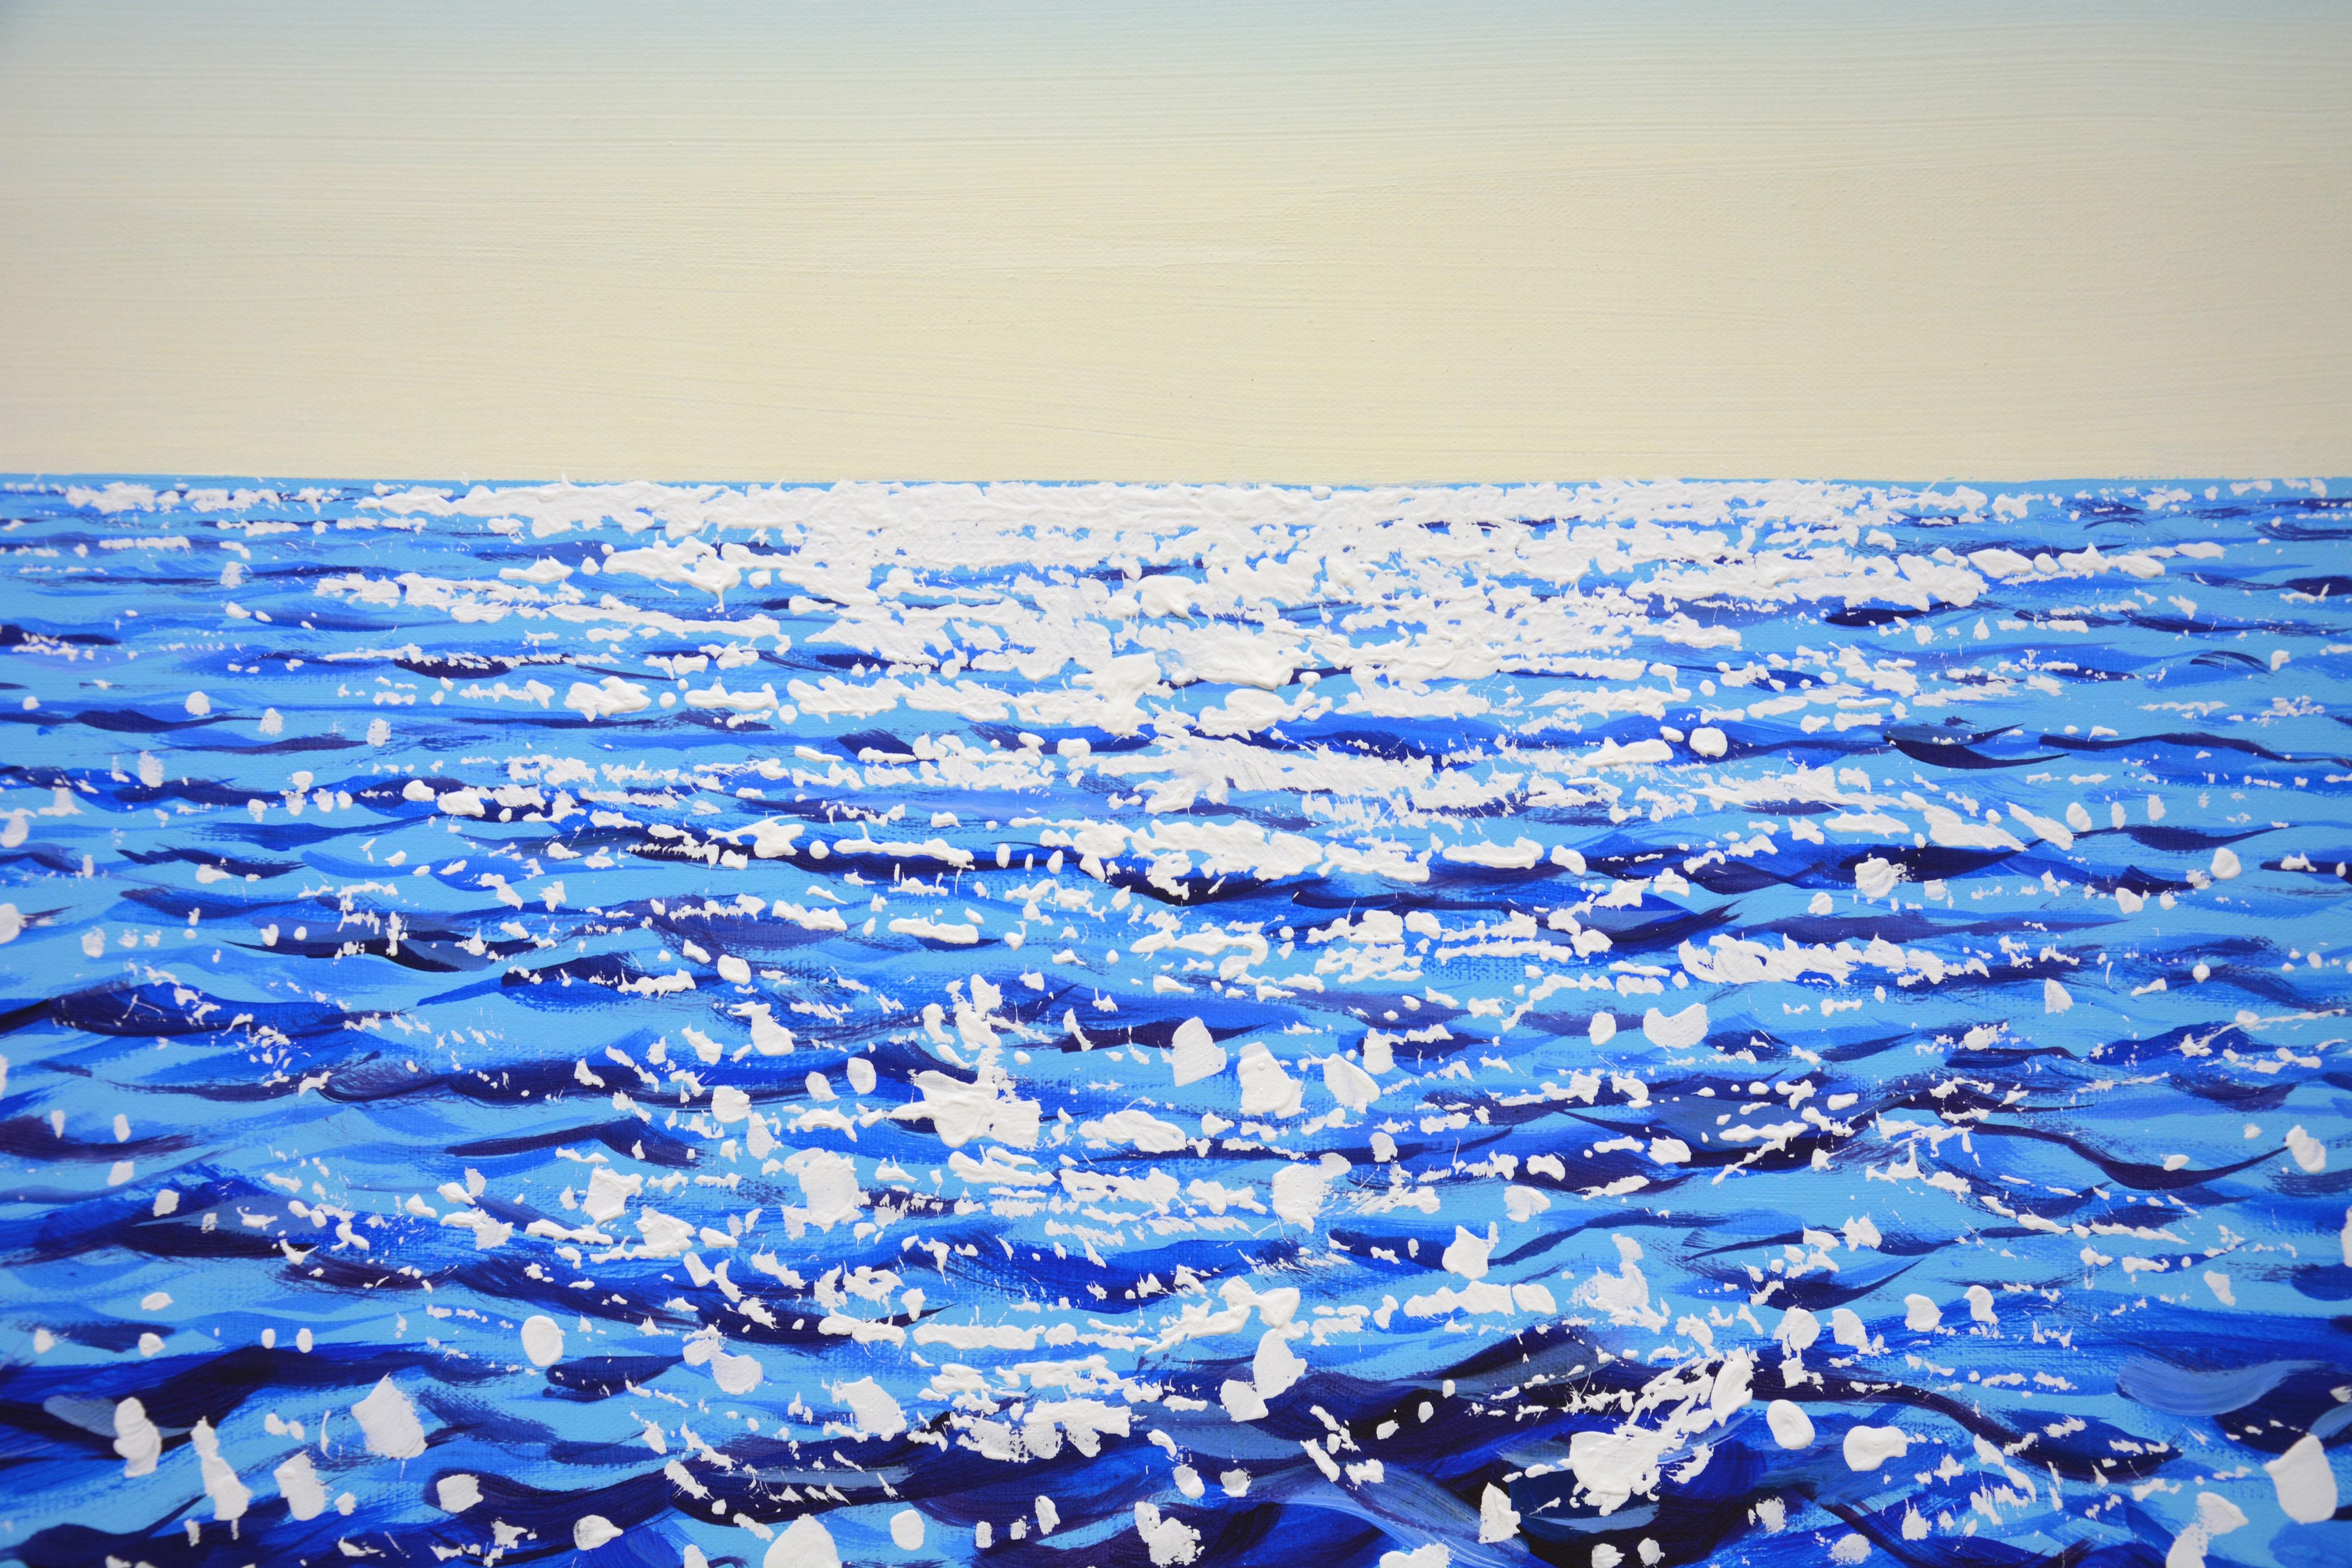 Blue water. Light. Summer, seascape: sun glare on blue water, clear sky, small waves create an atmosphere of relaxation and romance. Made in the style of realism, impressionism. The blue, white palette emphasizes the energy of the water. Part of a